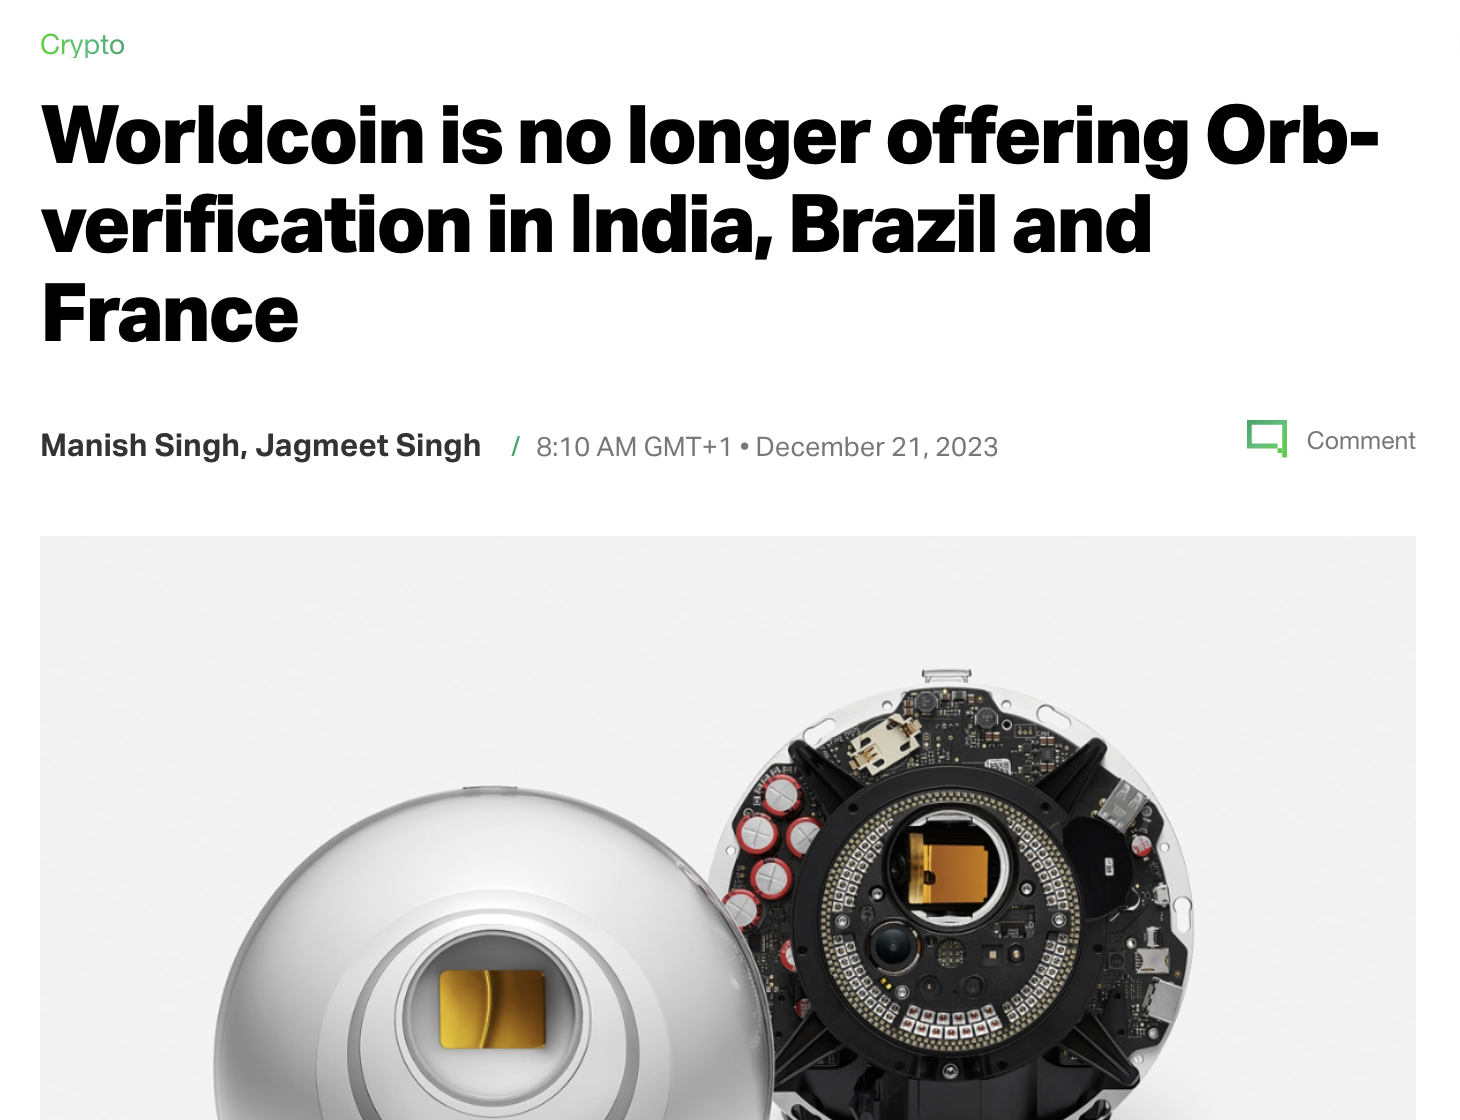 https://techcrunch.com/2023/12/20/worldcoin-is-no-longer-offering-orb-verification-in-india-brazil-and-france/